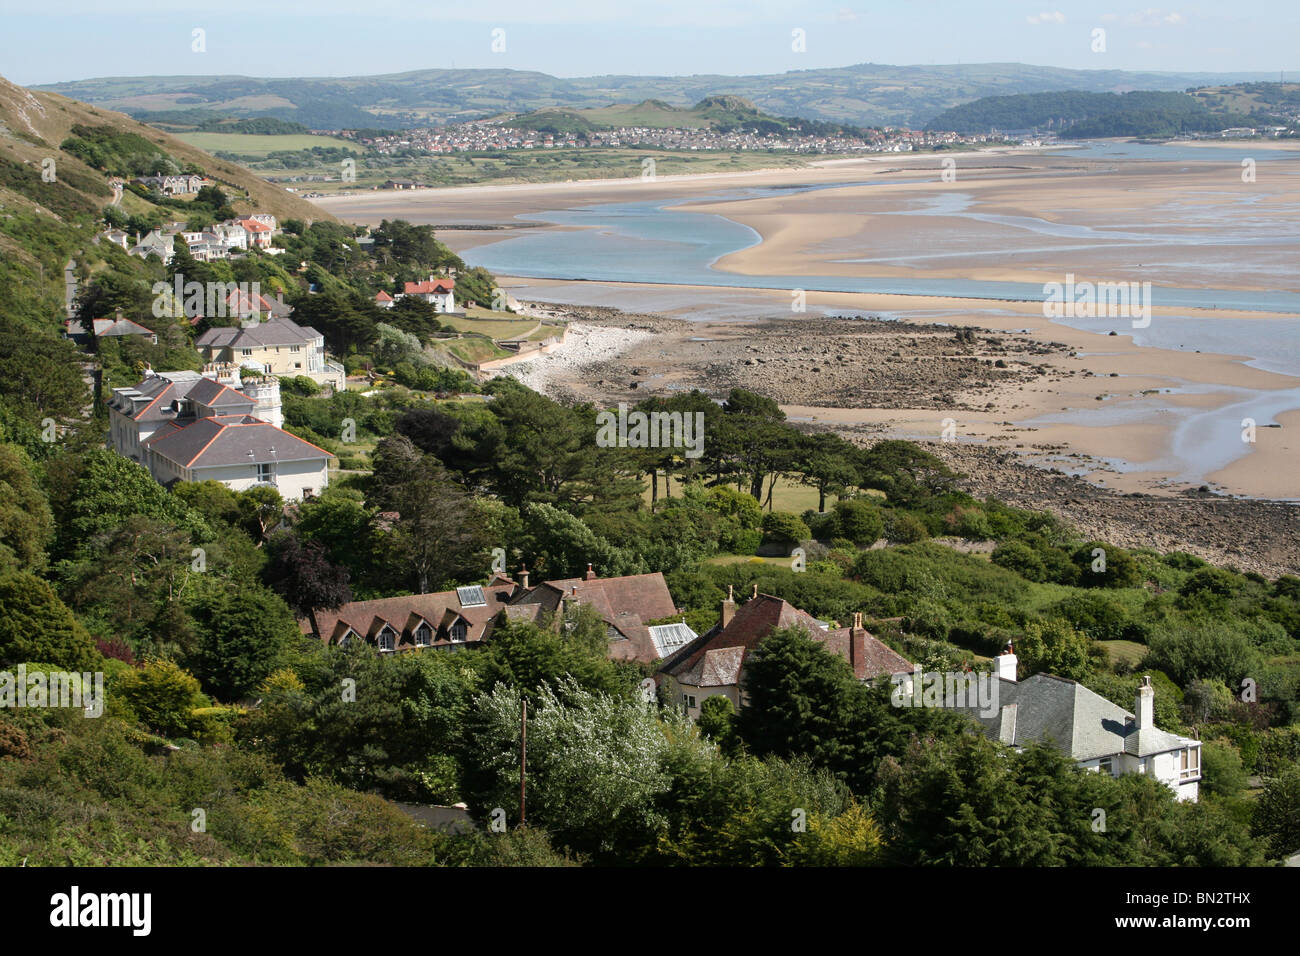 The Conwy Estuary As Seen from The Headland Of The Great Orme, Llandudno, Wales Stock Photo